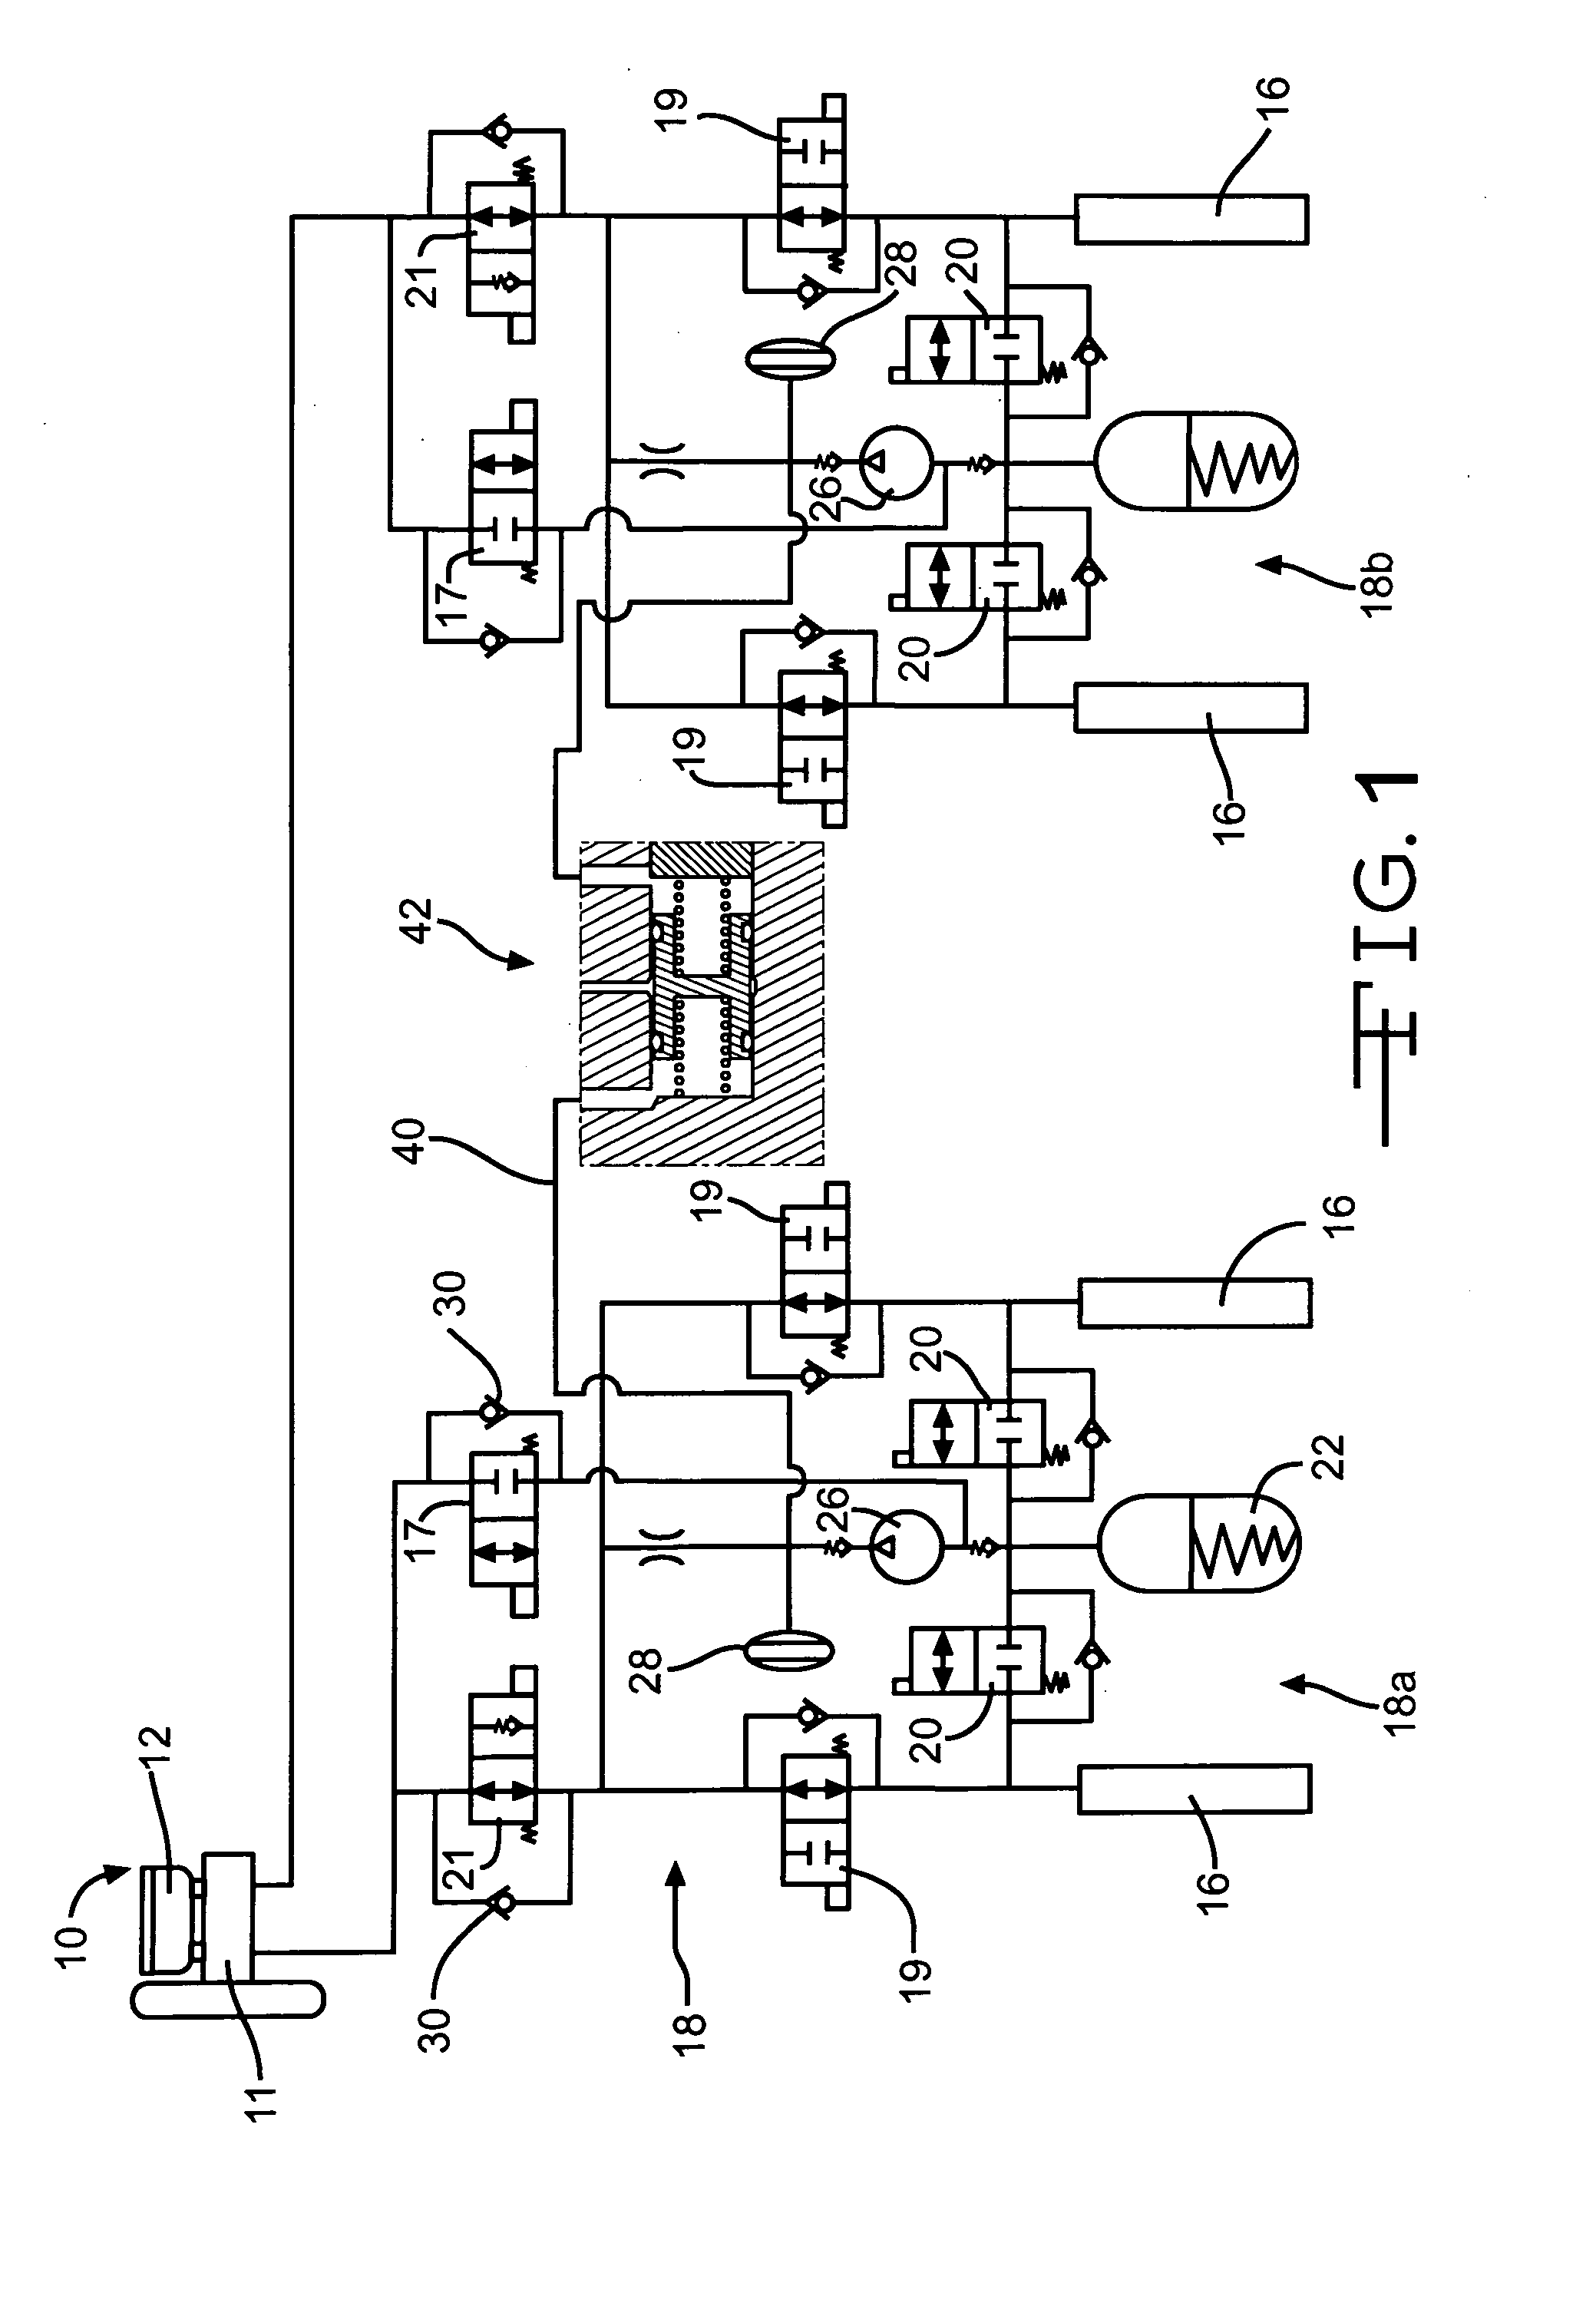 Floating piston for augmenting pressurized fluid flow during vehicle braking operations